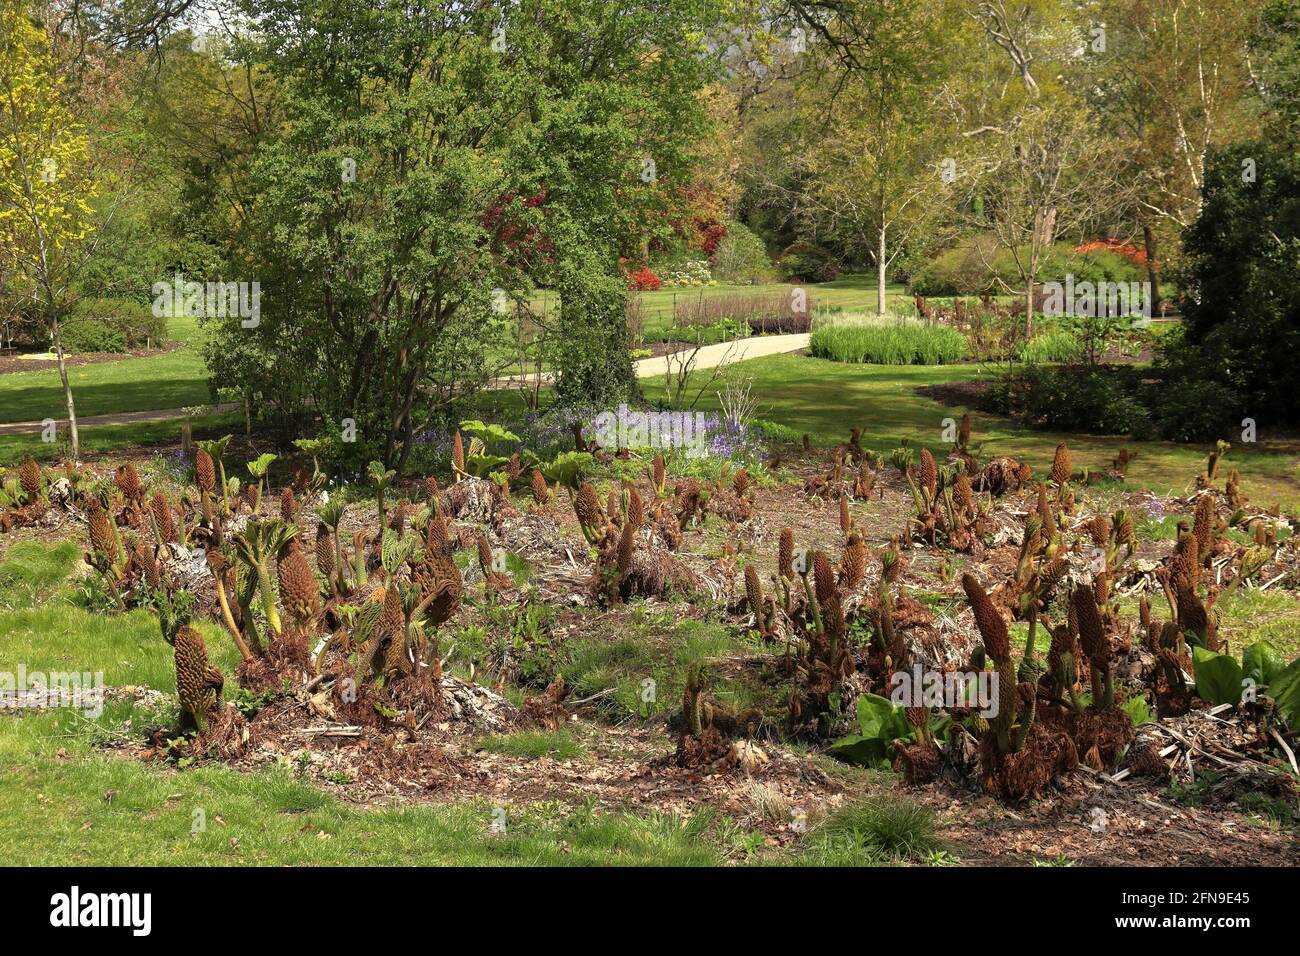 Spring in an English landscape garden with Gunnera plants in early growth Stock Photo